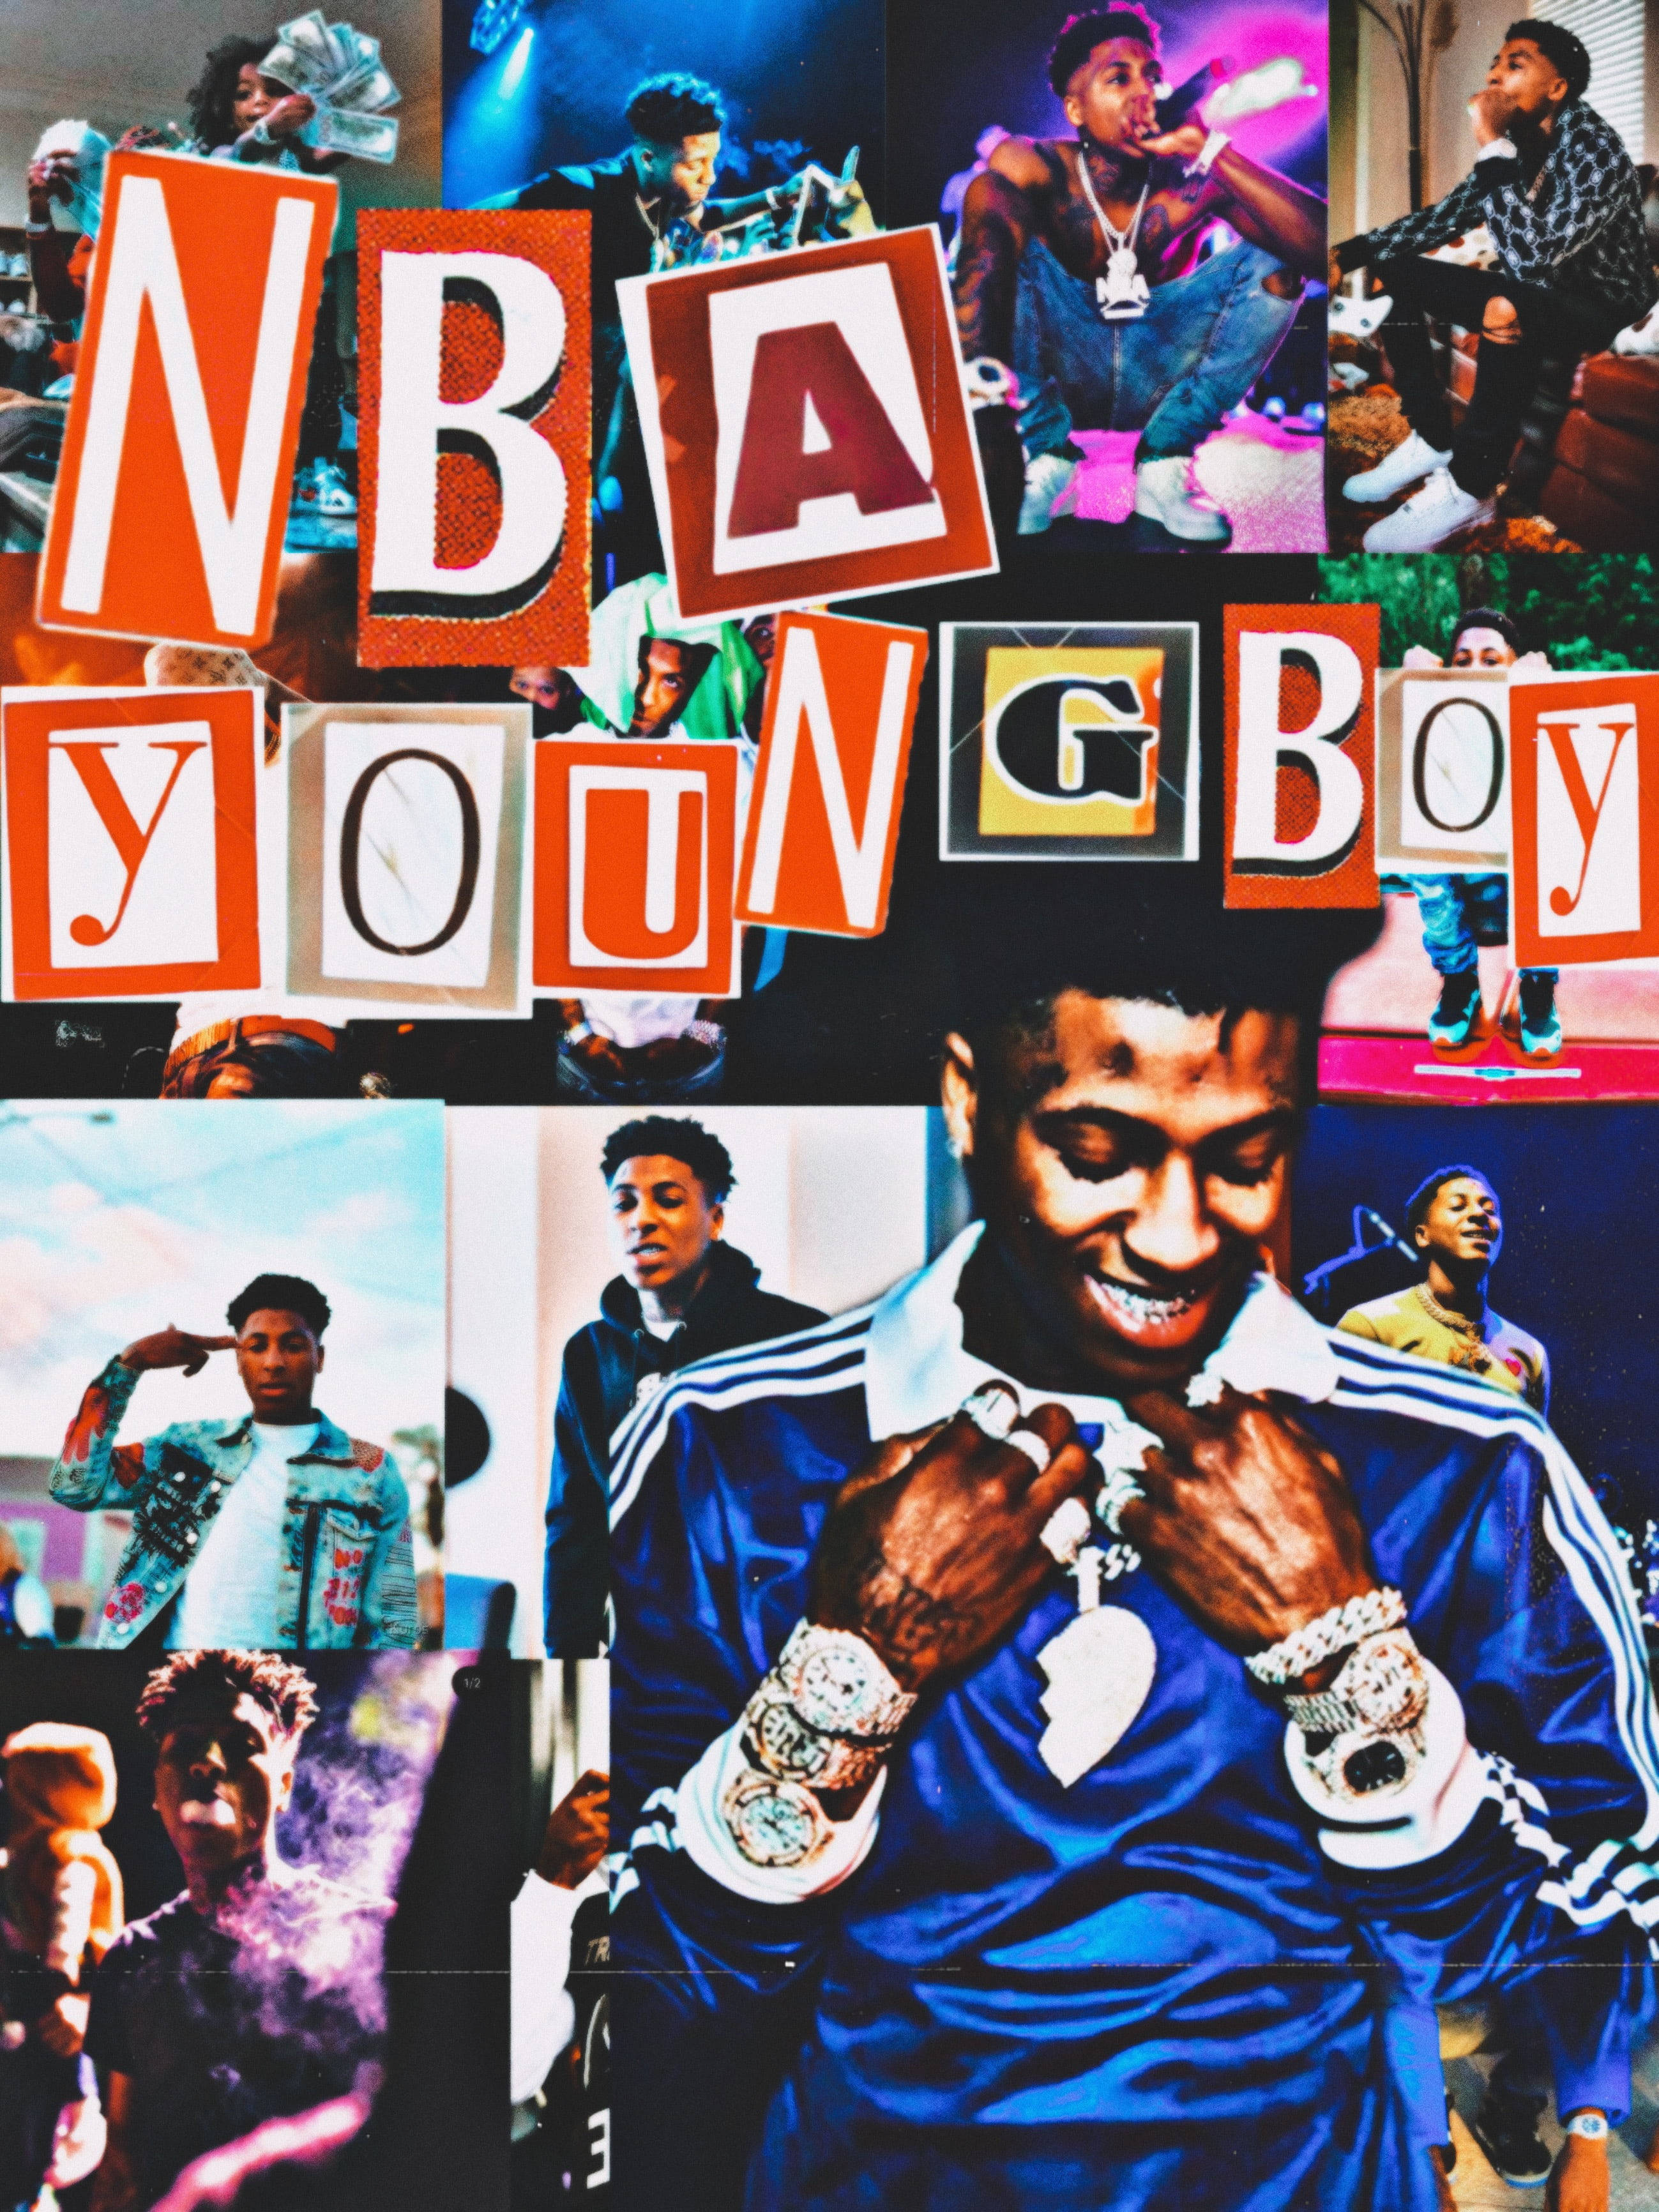 Nba Youngboy Logo Poster Design Background